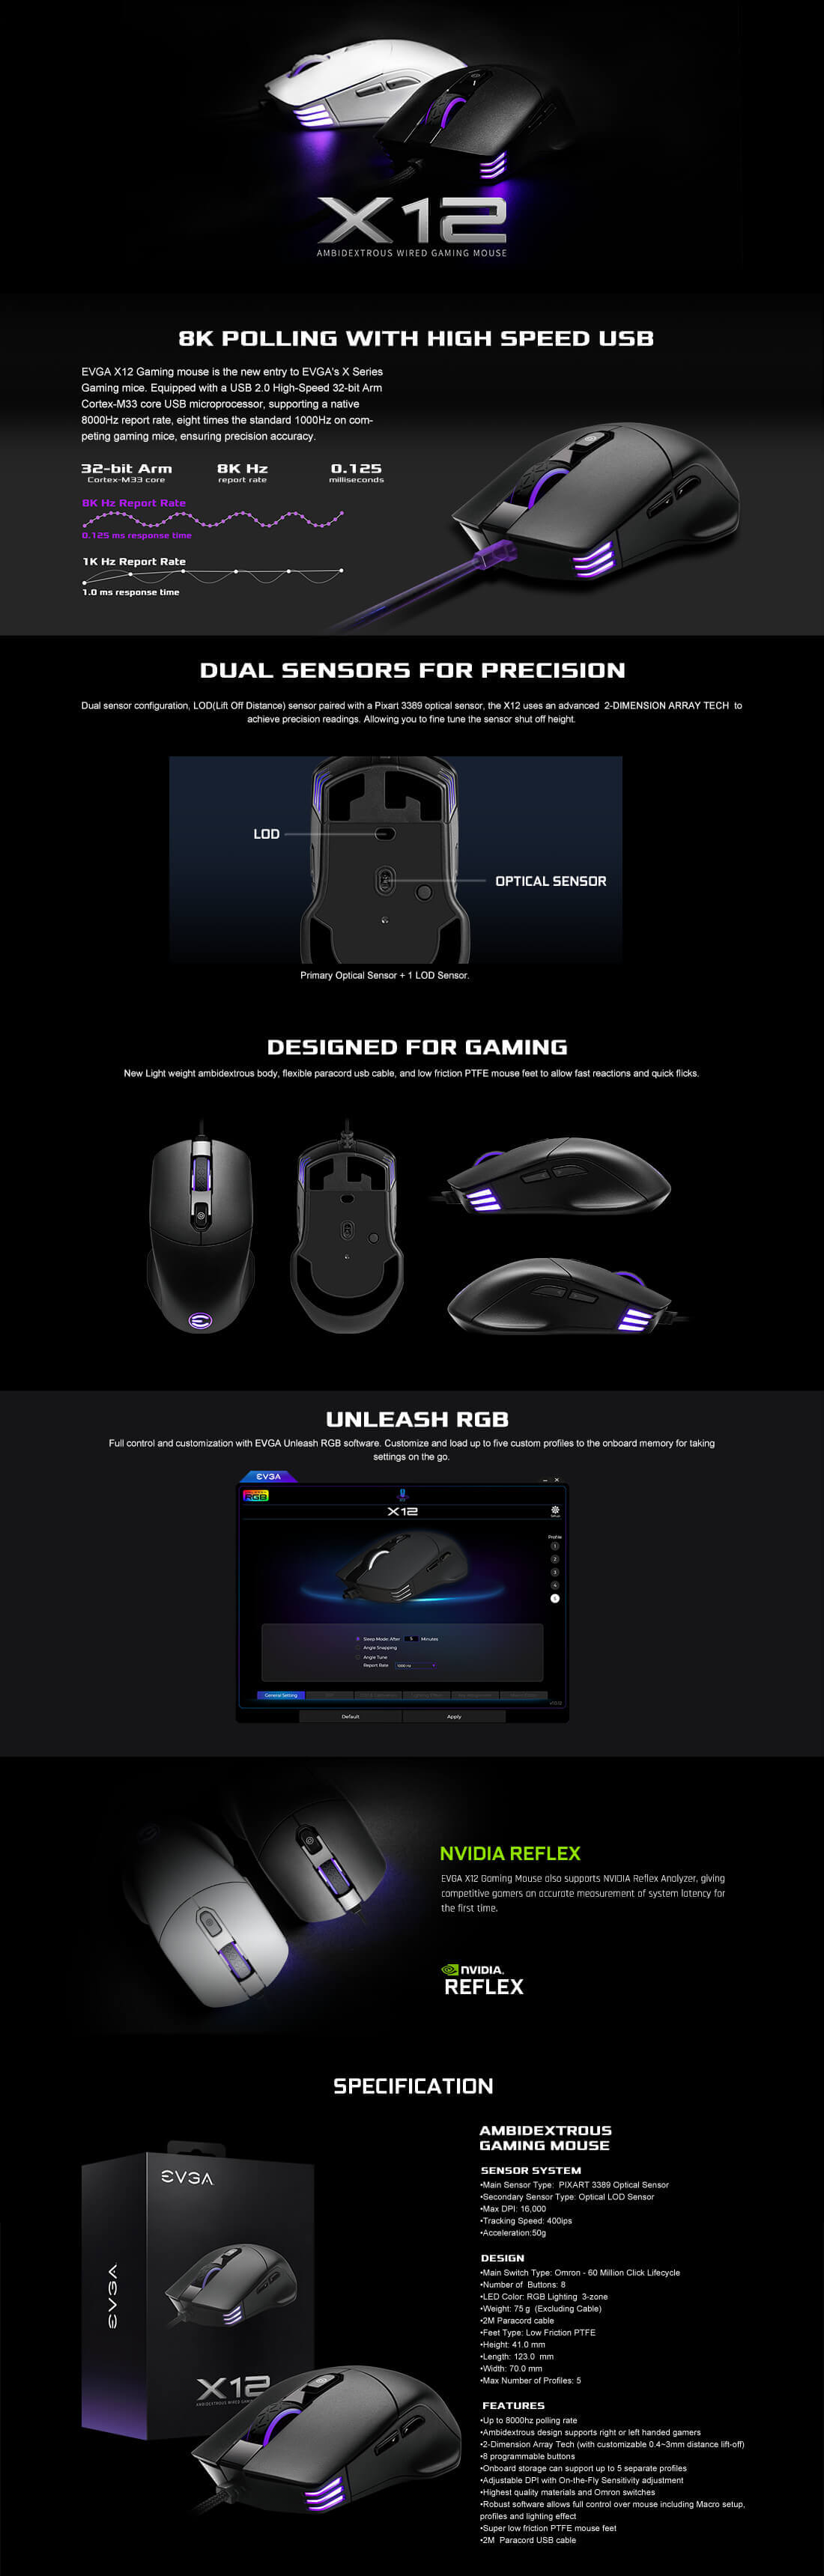 EVGA X12 Gaming Mouse - 8K - Wired - Black - Customizable - Dual Sensor - 16,000 DPI - 5 Profiles - 8 Buttons - Ambidextrous Light Weight - RGB